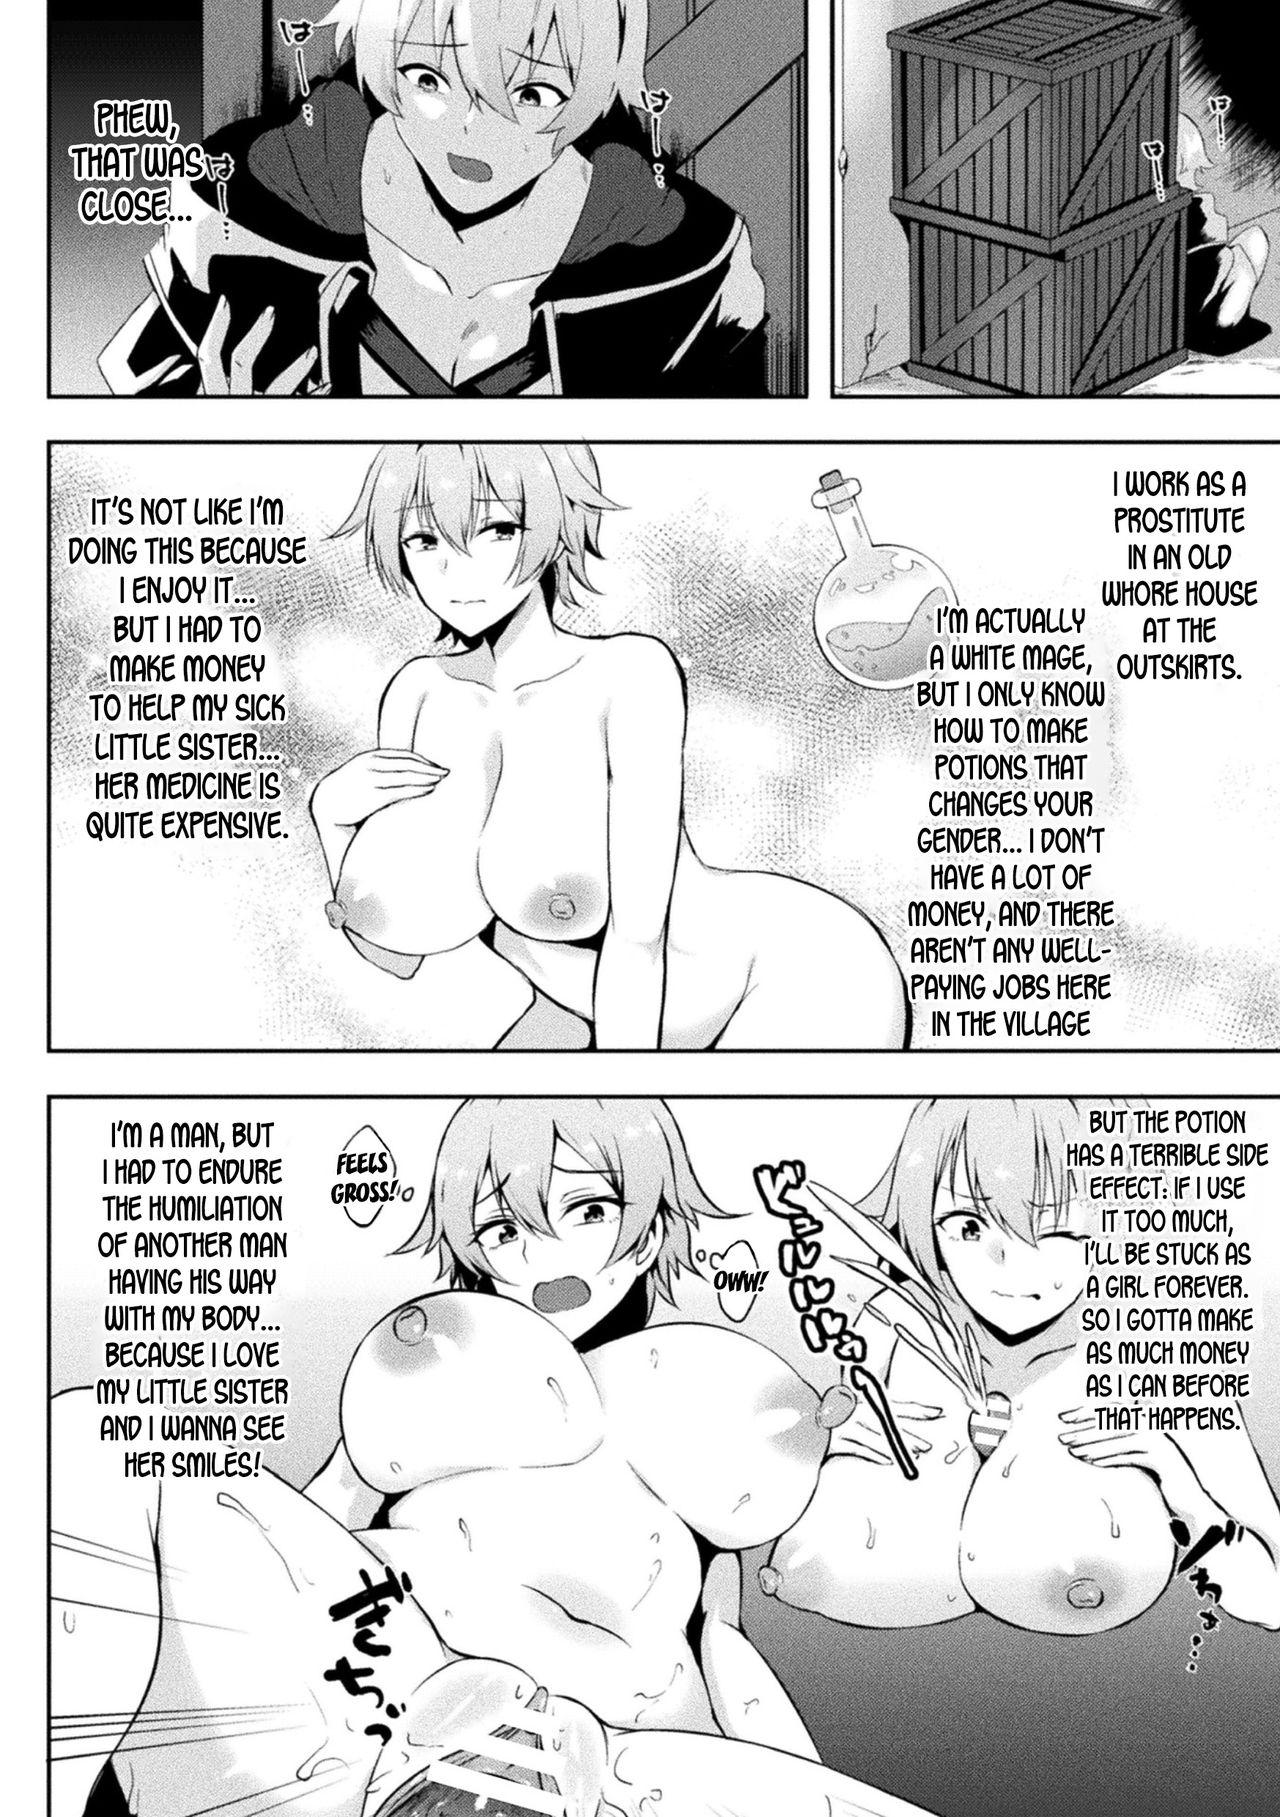 Piercing Soshite Ani wa Shou ni Ochiru | And then the Brother turned into a Prostitute French - Page 2